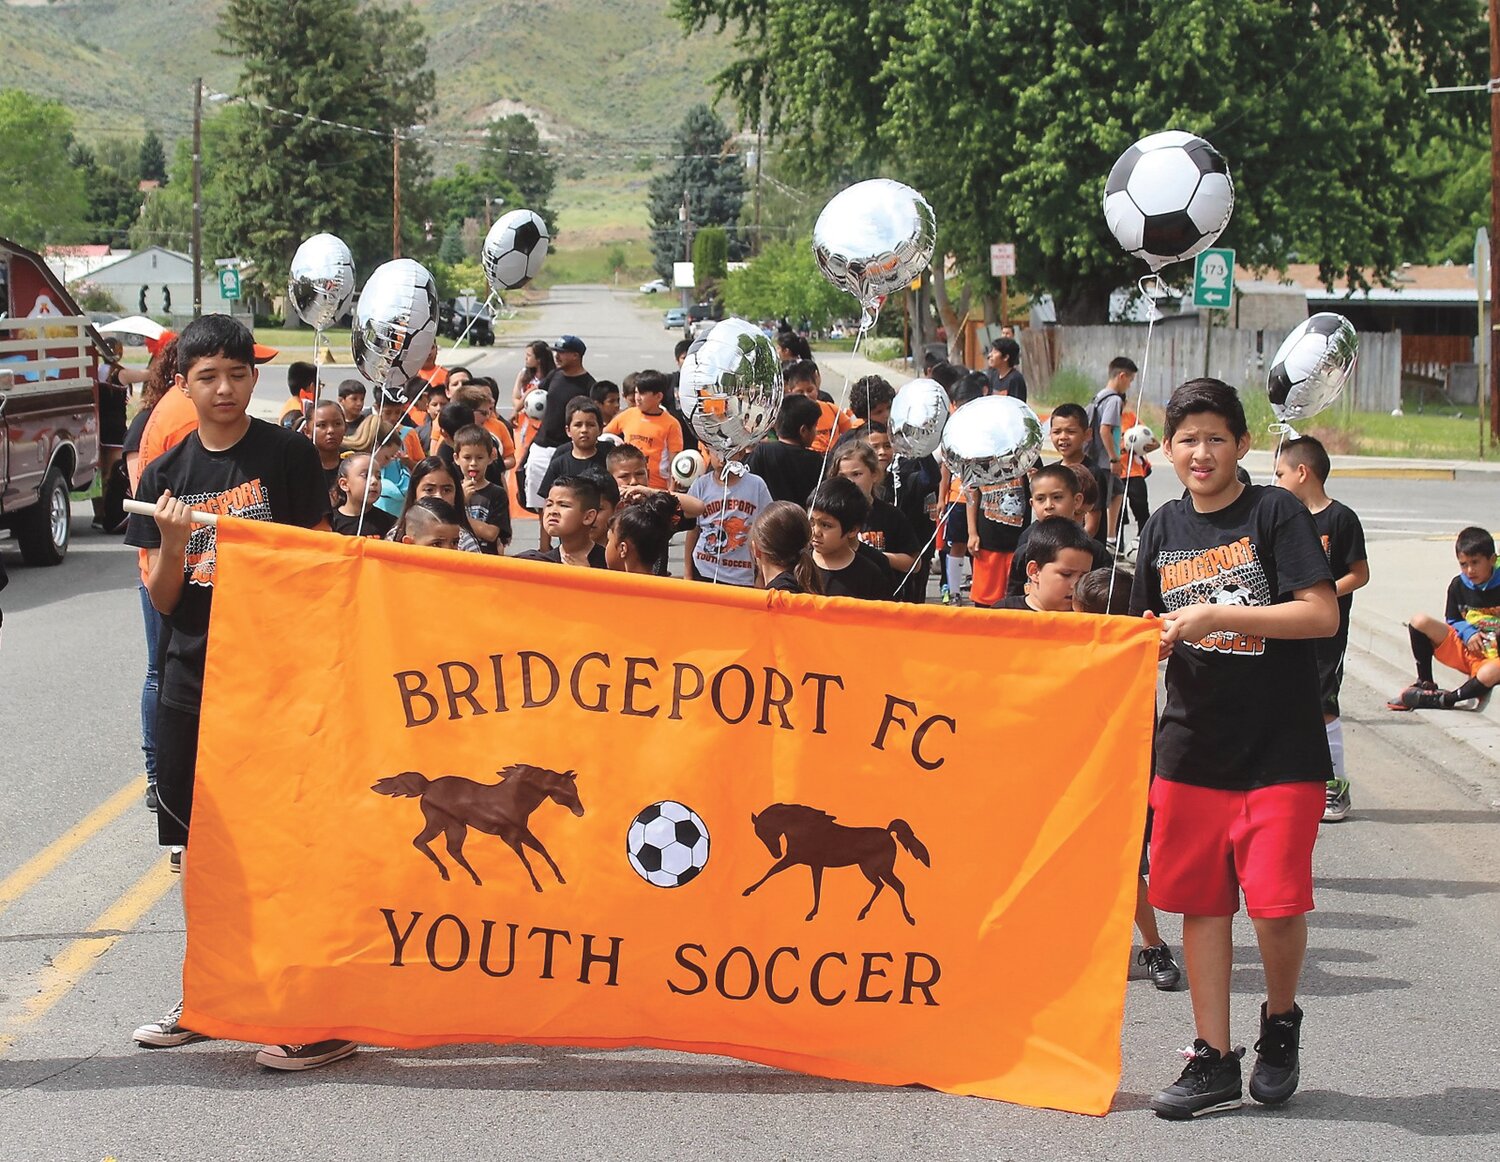 The Bridgeport Youth Soccer Club has become a fixture in the annual parade.